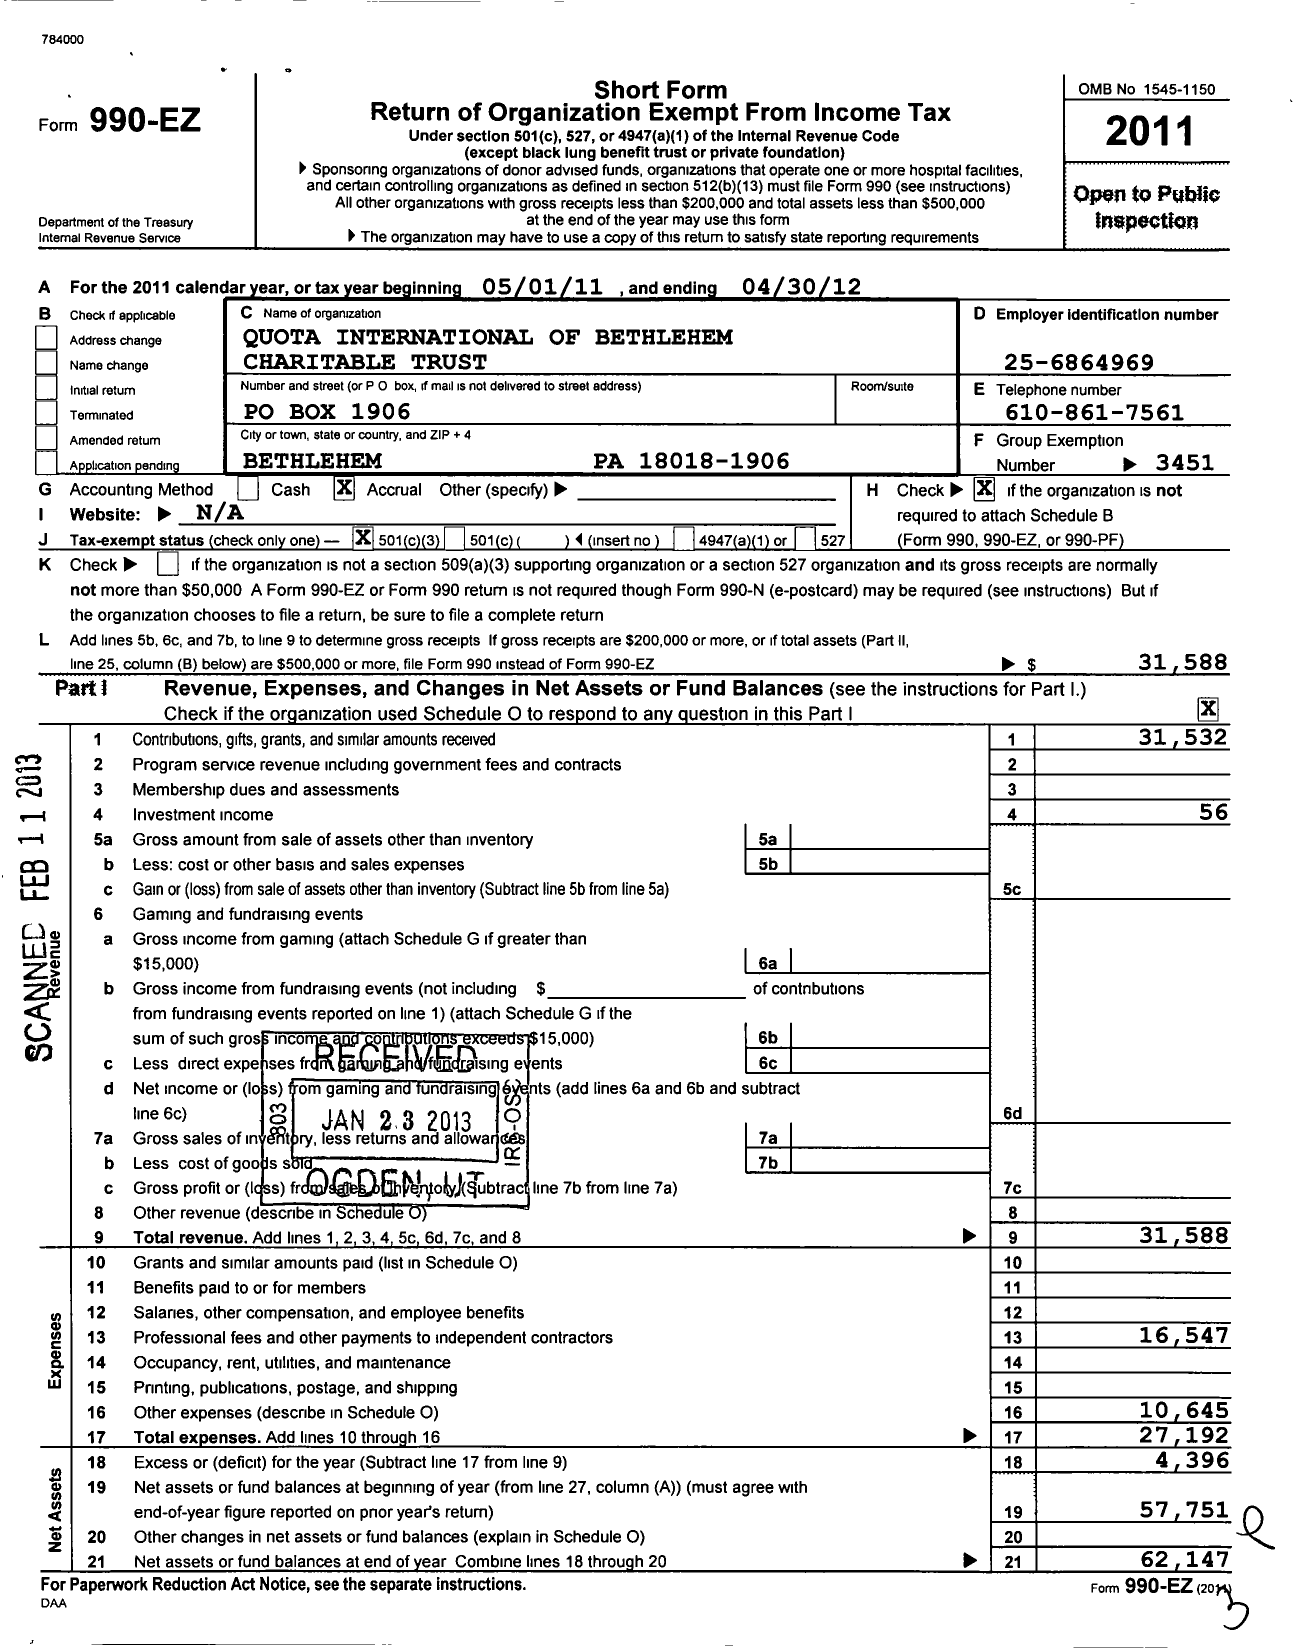 Image of first page of 2011 Form 990EZ for We Share Foundation / Quota International of Bethlehem CH